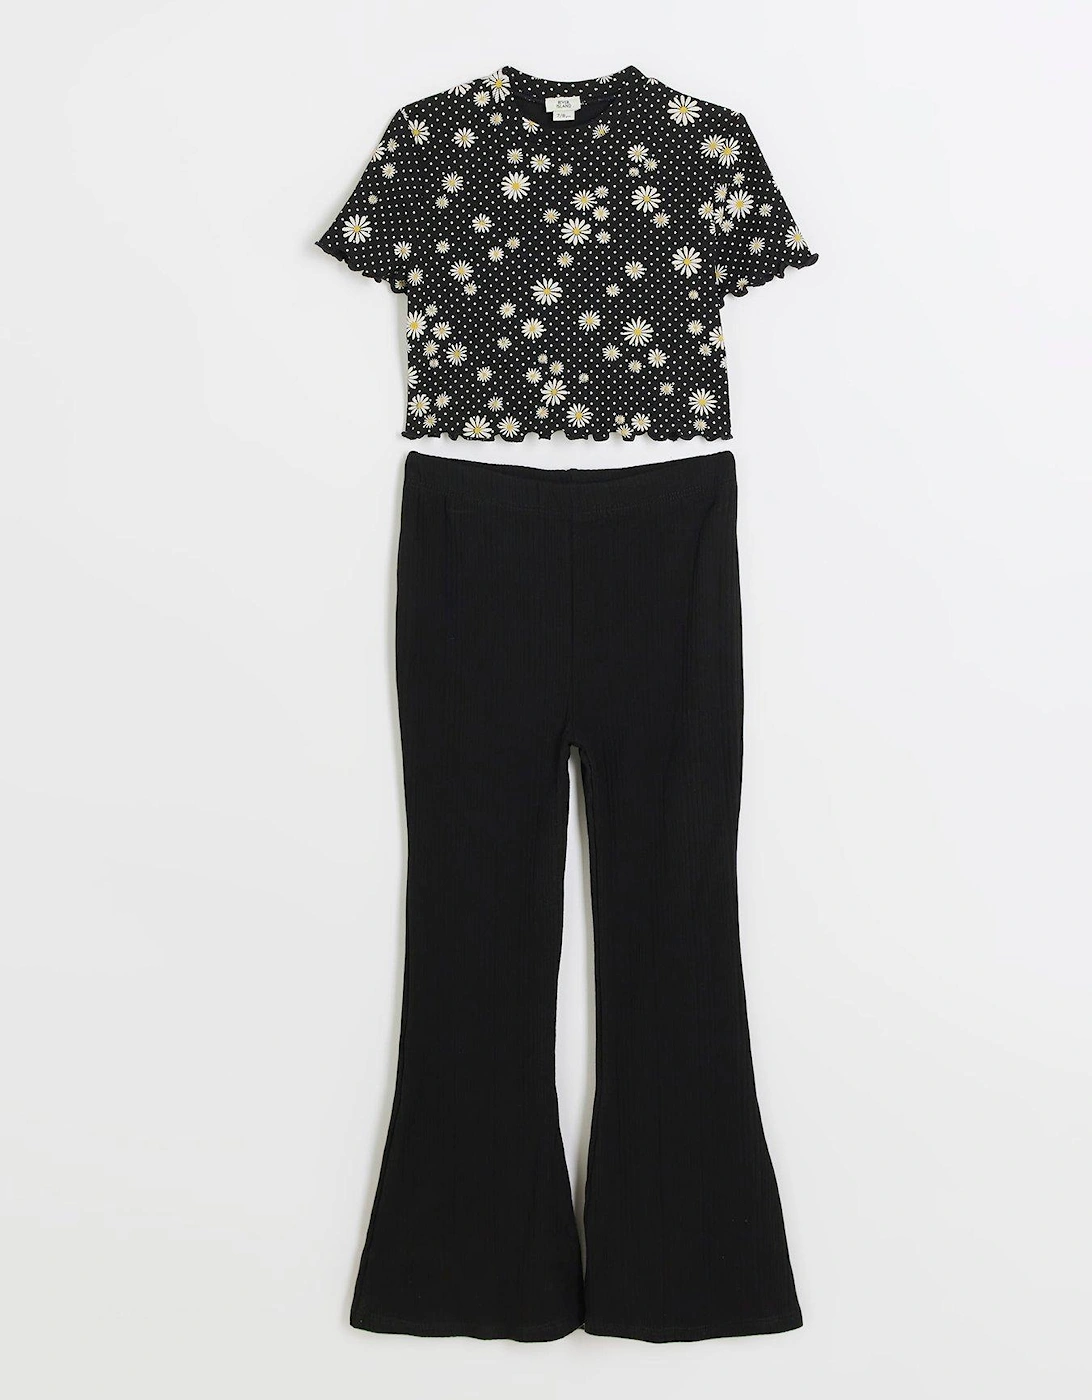 Girls Floral Top And Trousers Set - Black